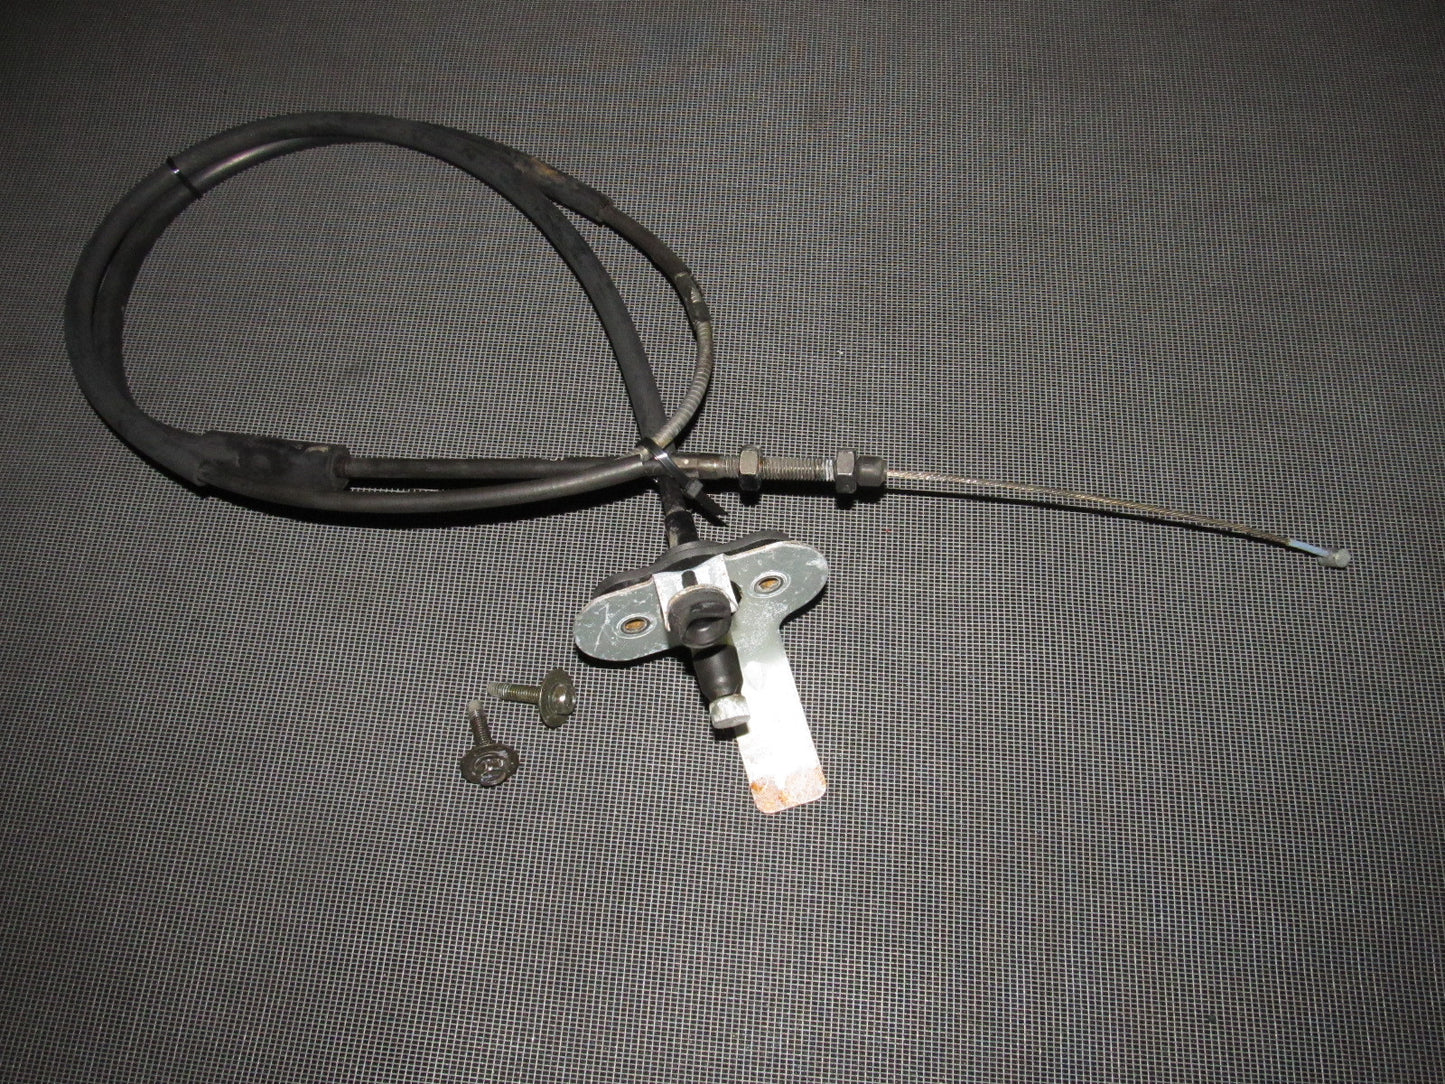 94 95 96 97 98 99 Toyota Celica OEM 5SFE M/T Cruise Control Cable